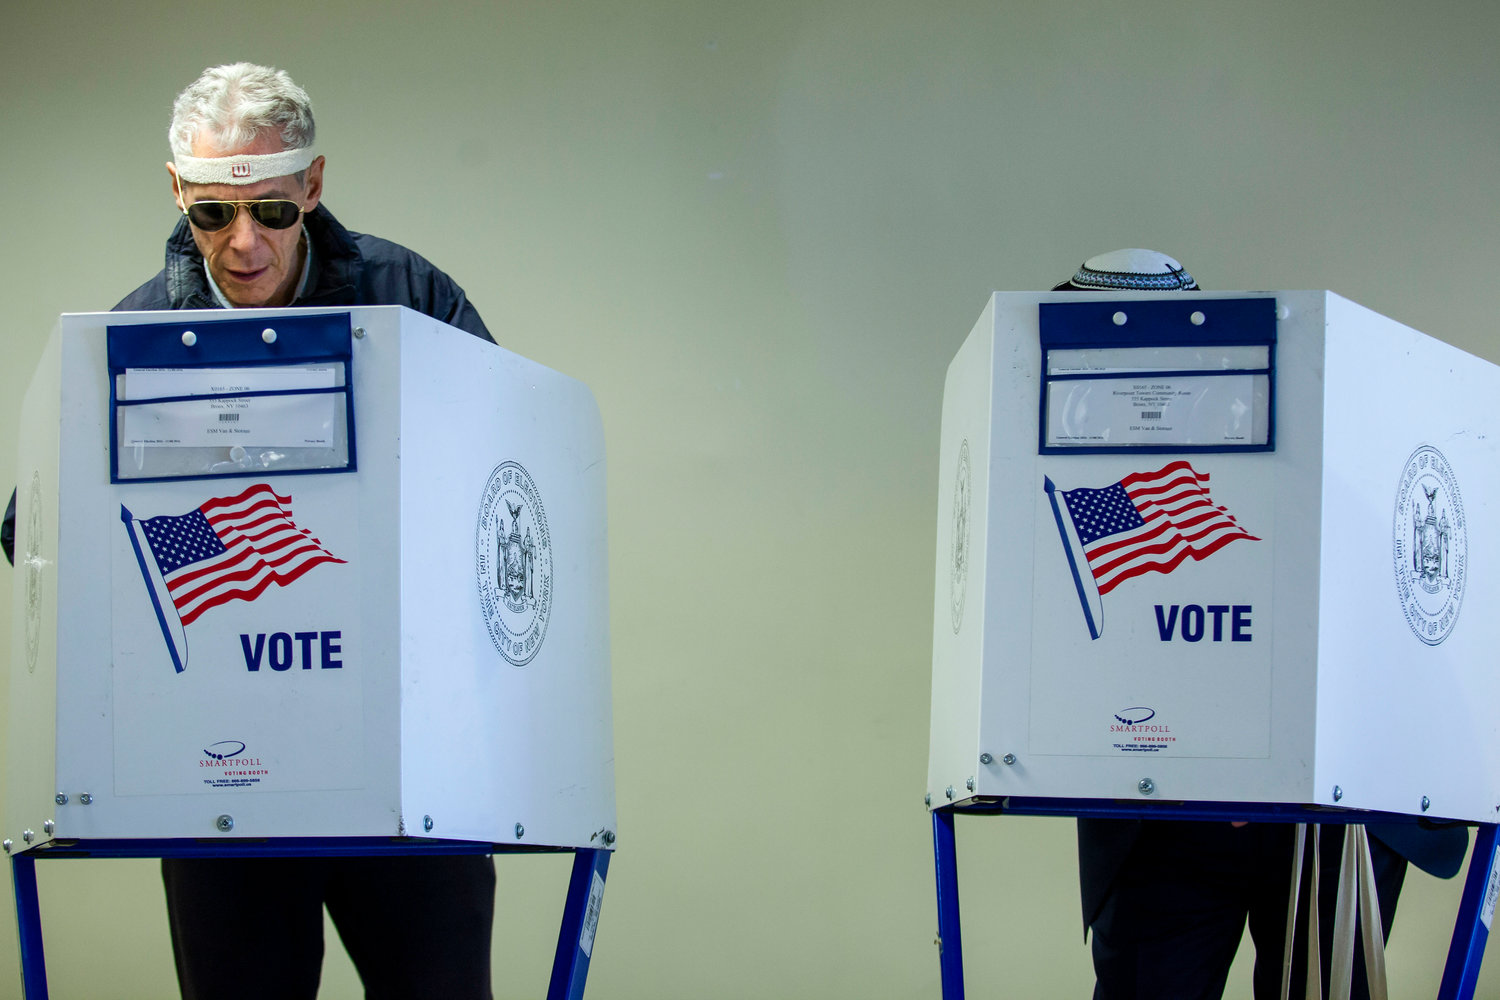 Worried about crowded poll sites? Perry Grossman, a senior staff attorney at the New York Civil Liberties Union, recommends taking advantage of the state’s nine days of early voting to avoid crowds and ensure ballots get counted in November’s election.